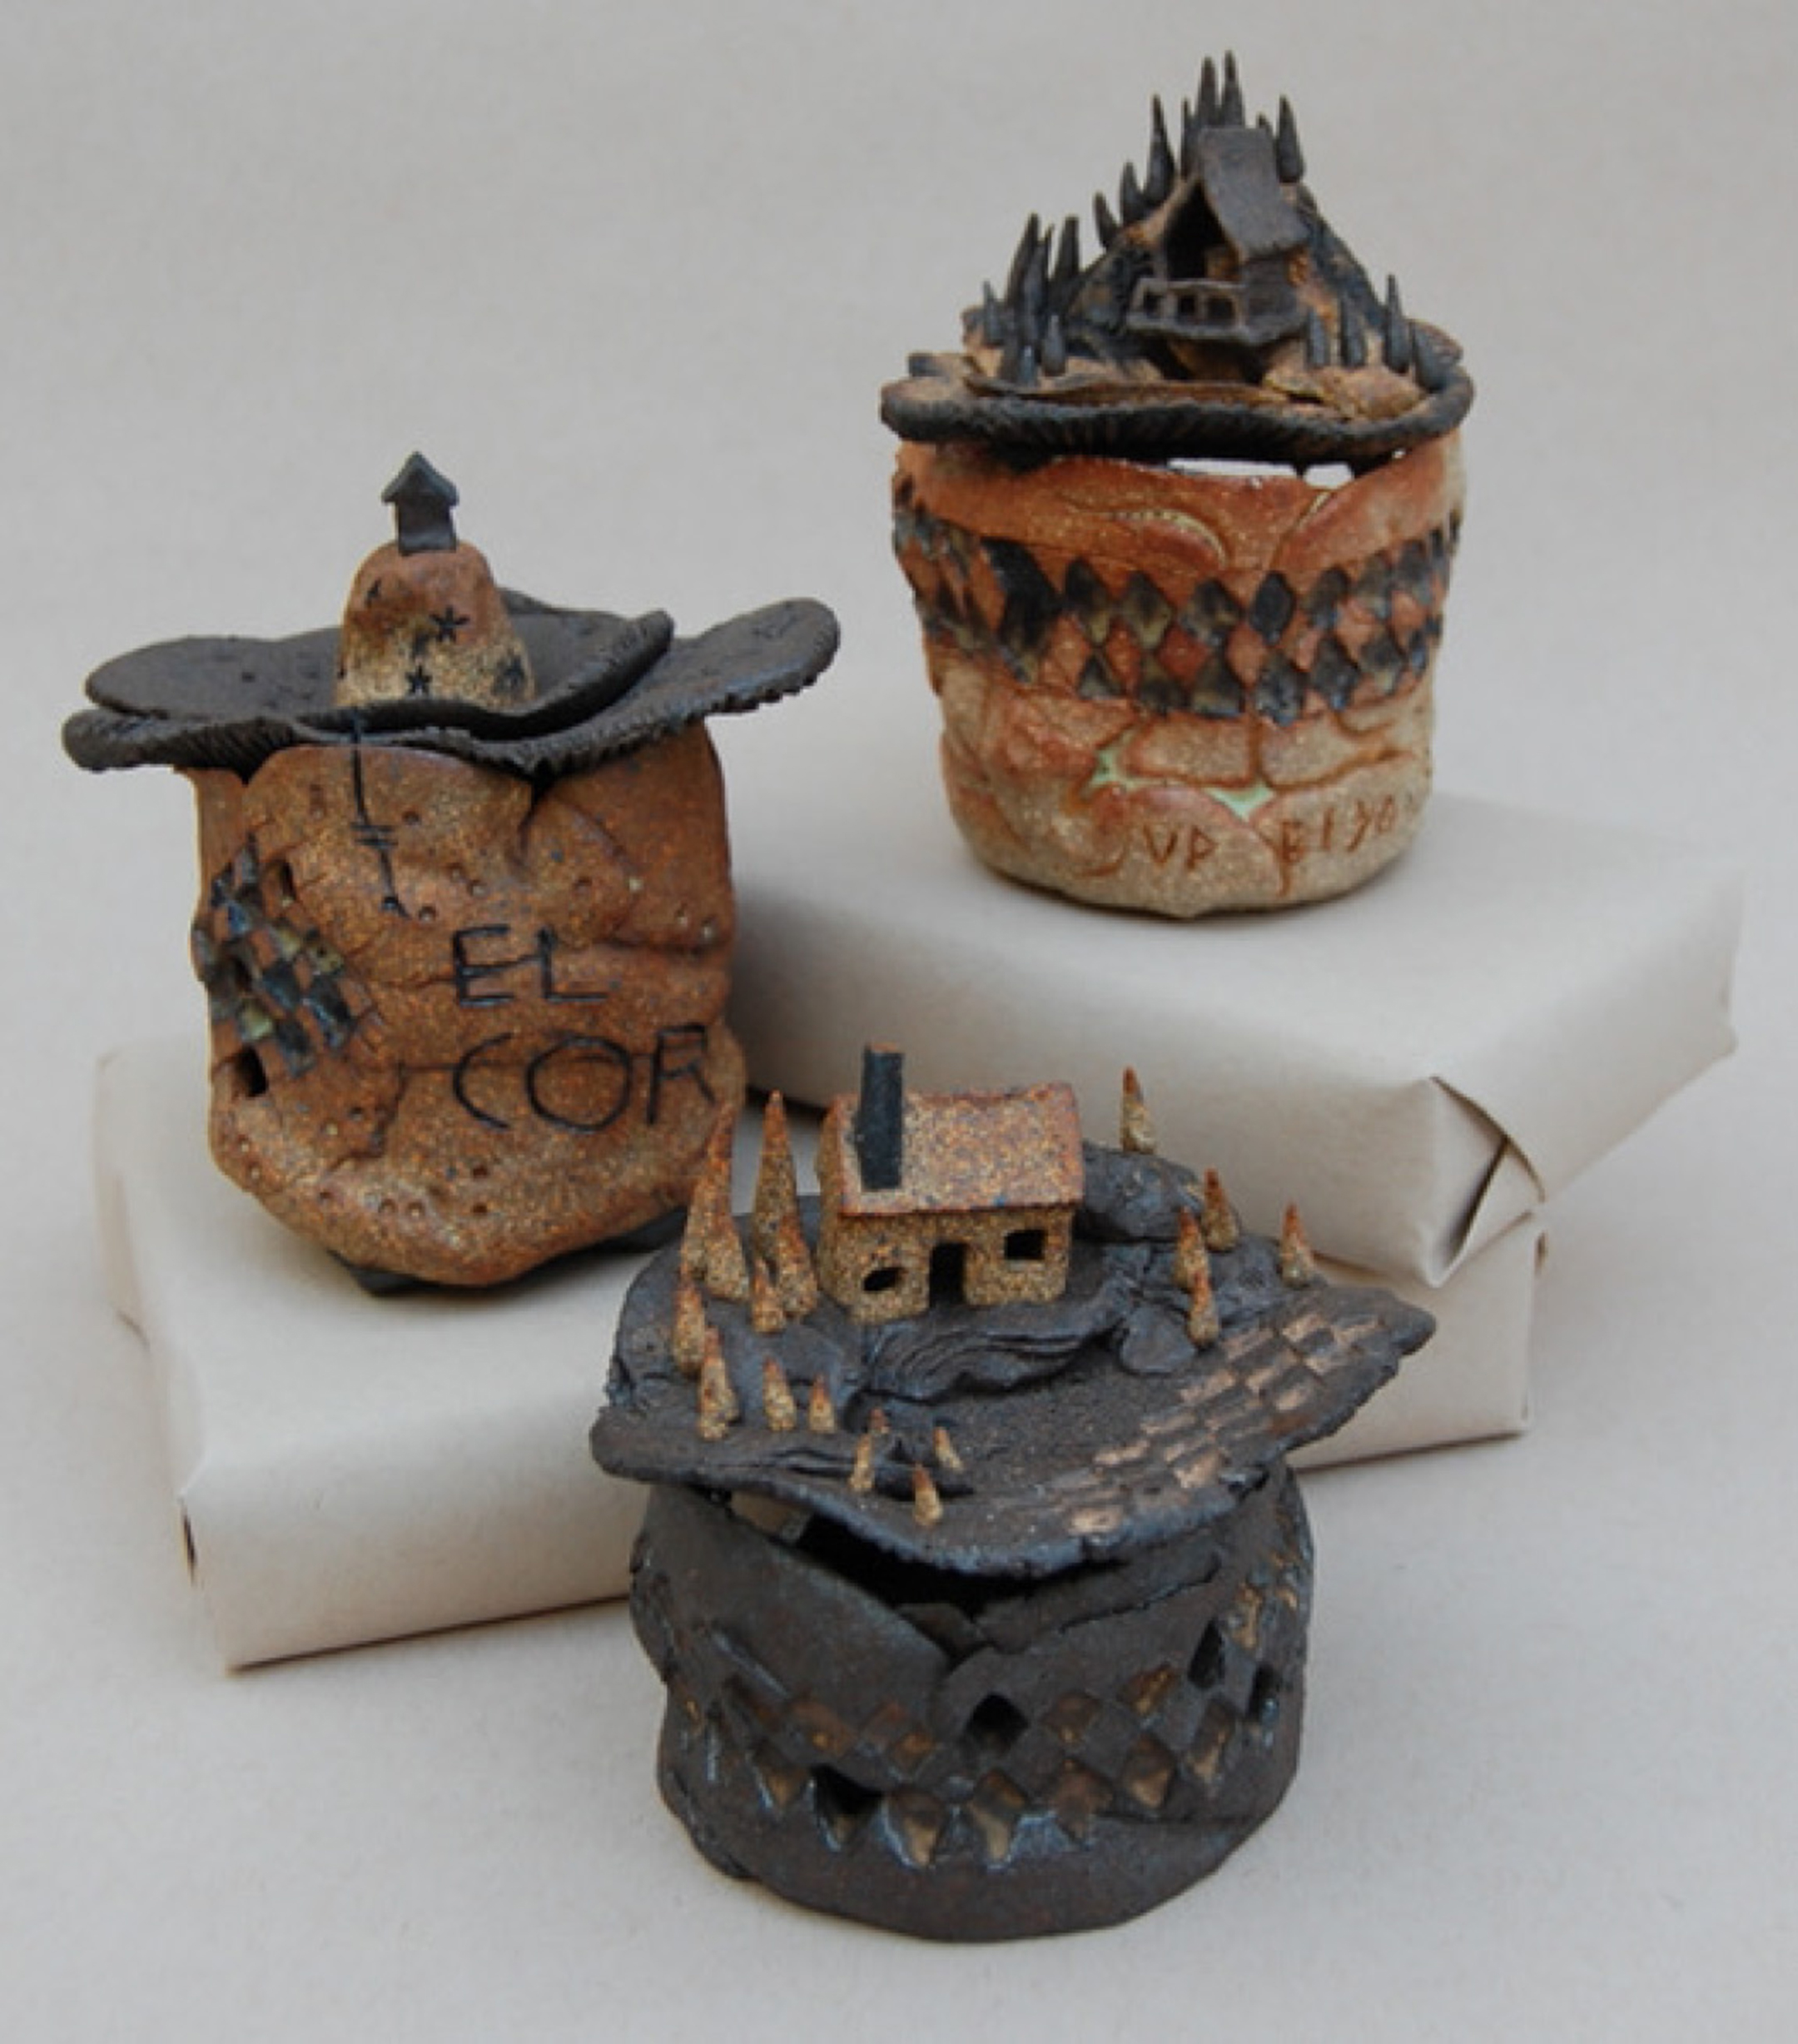 Three cup-shaped sculptures with little houses on top of each